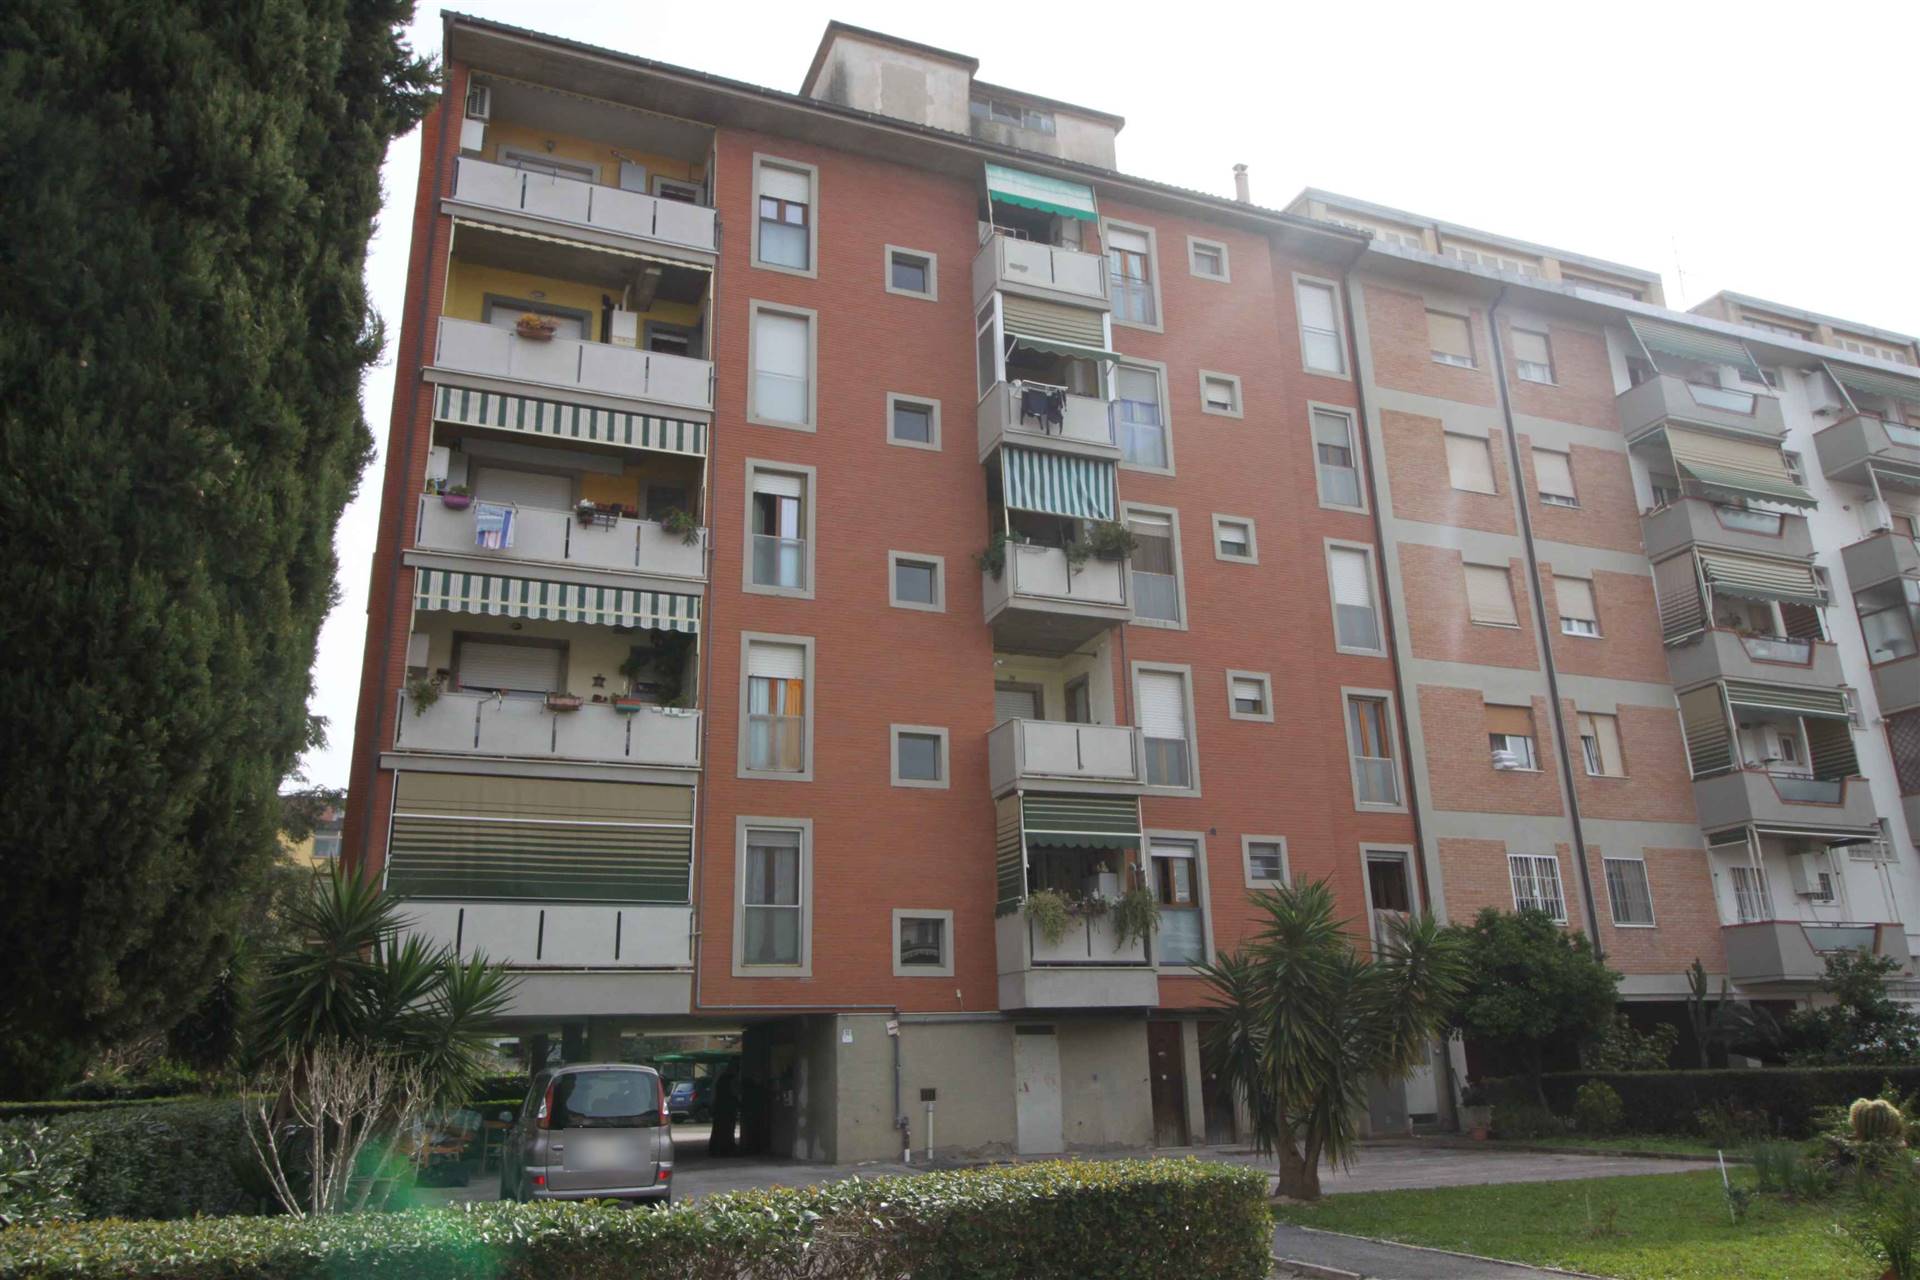 GORARELLA, GROSSETO, Apartment for sale of 75 Sq. mt., Be restored, Heating Individual heating system, Energetic class: E, placed at 2° on 5, composed by: 4 Rooms, Little kitchen, , 2 Bedrooms, 1 